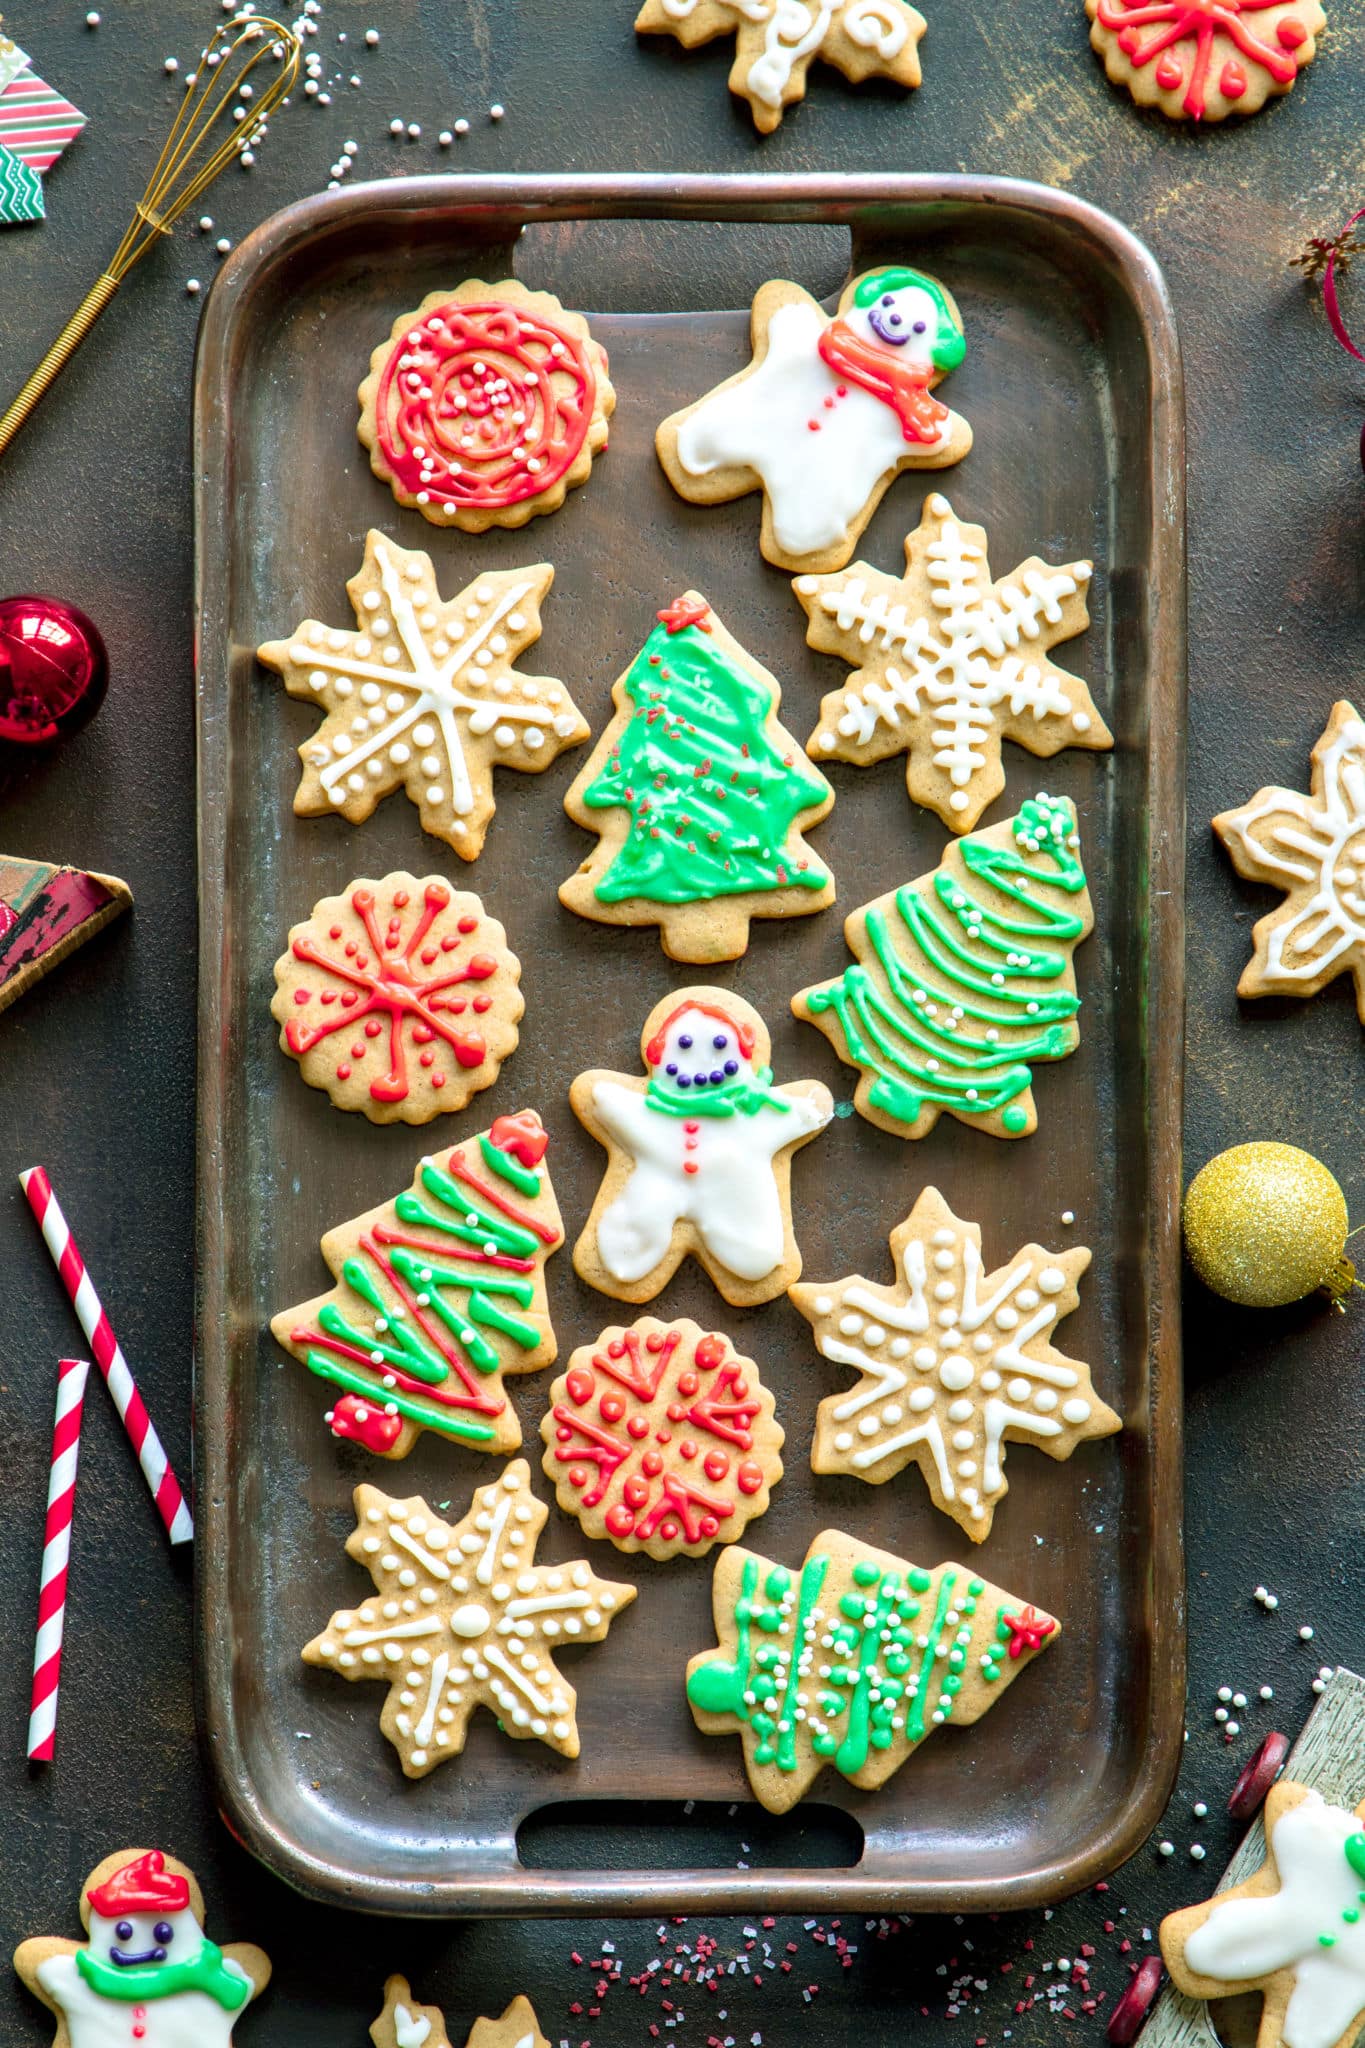 Frosted Spiced Sugar Cookies on a baking sheet. The cookies are decorated as snowmen, Christmas trees, and snowflakes. 